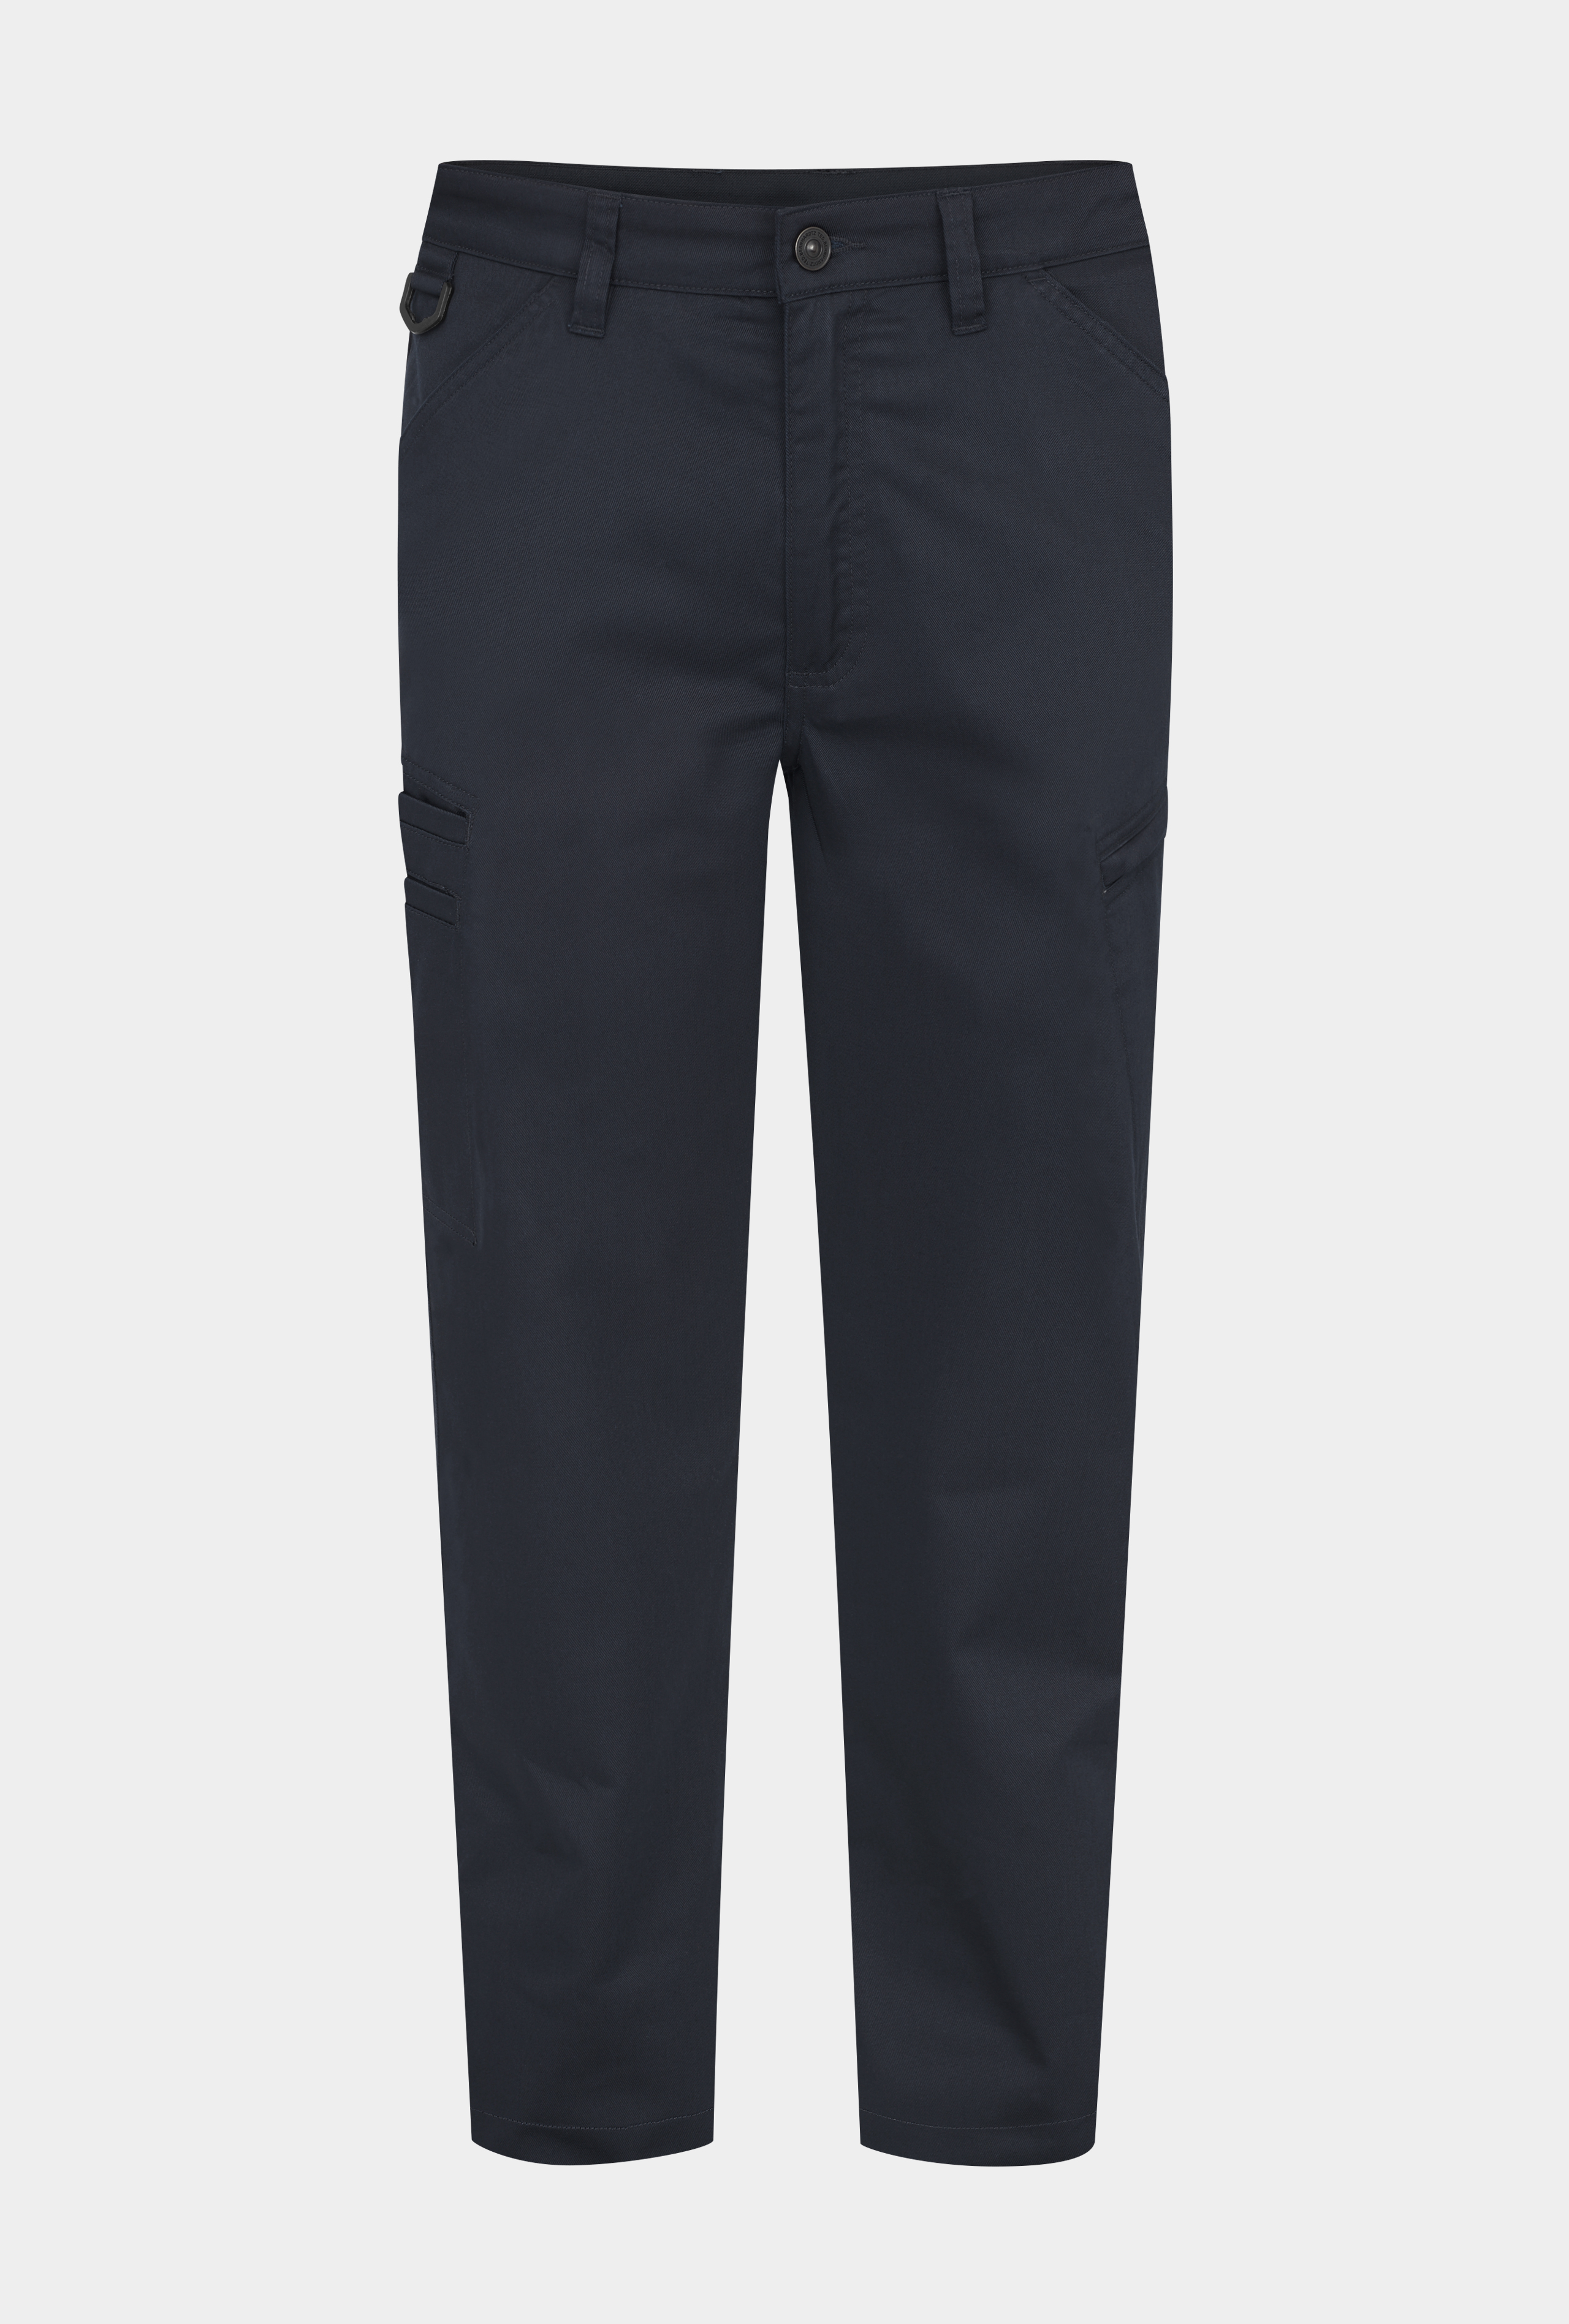 Men’s servicetrousers Joel | Ted Bernhardtz – At Work collection shop